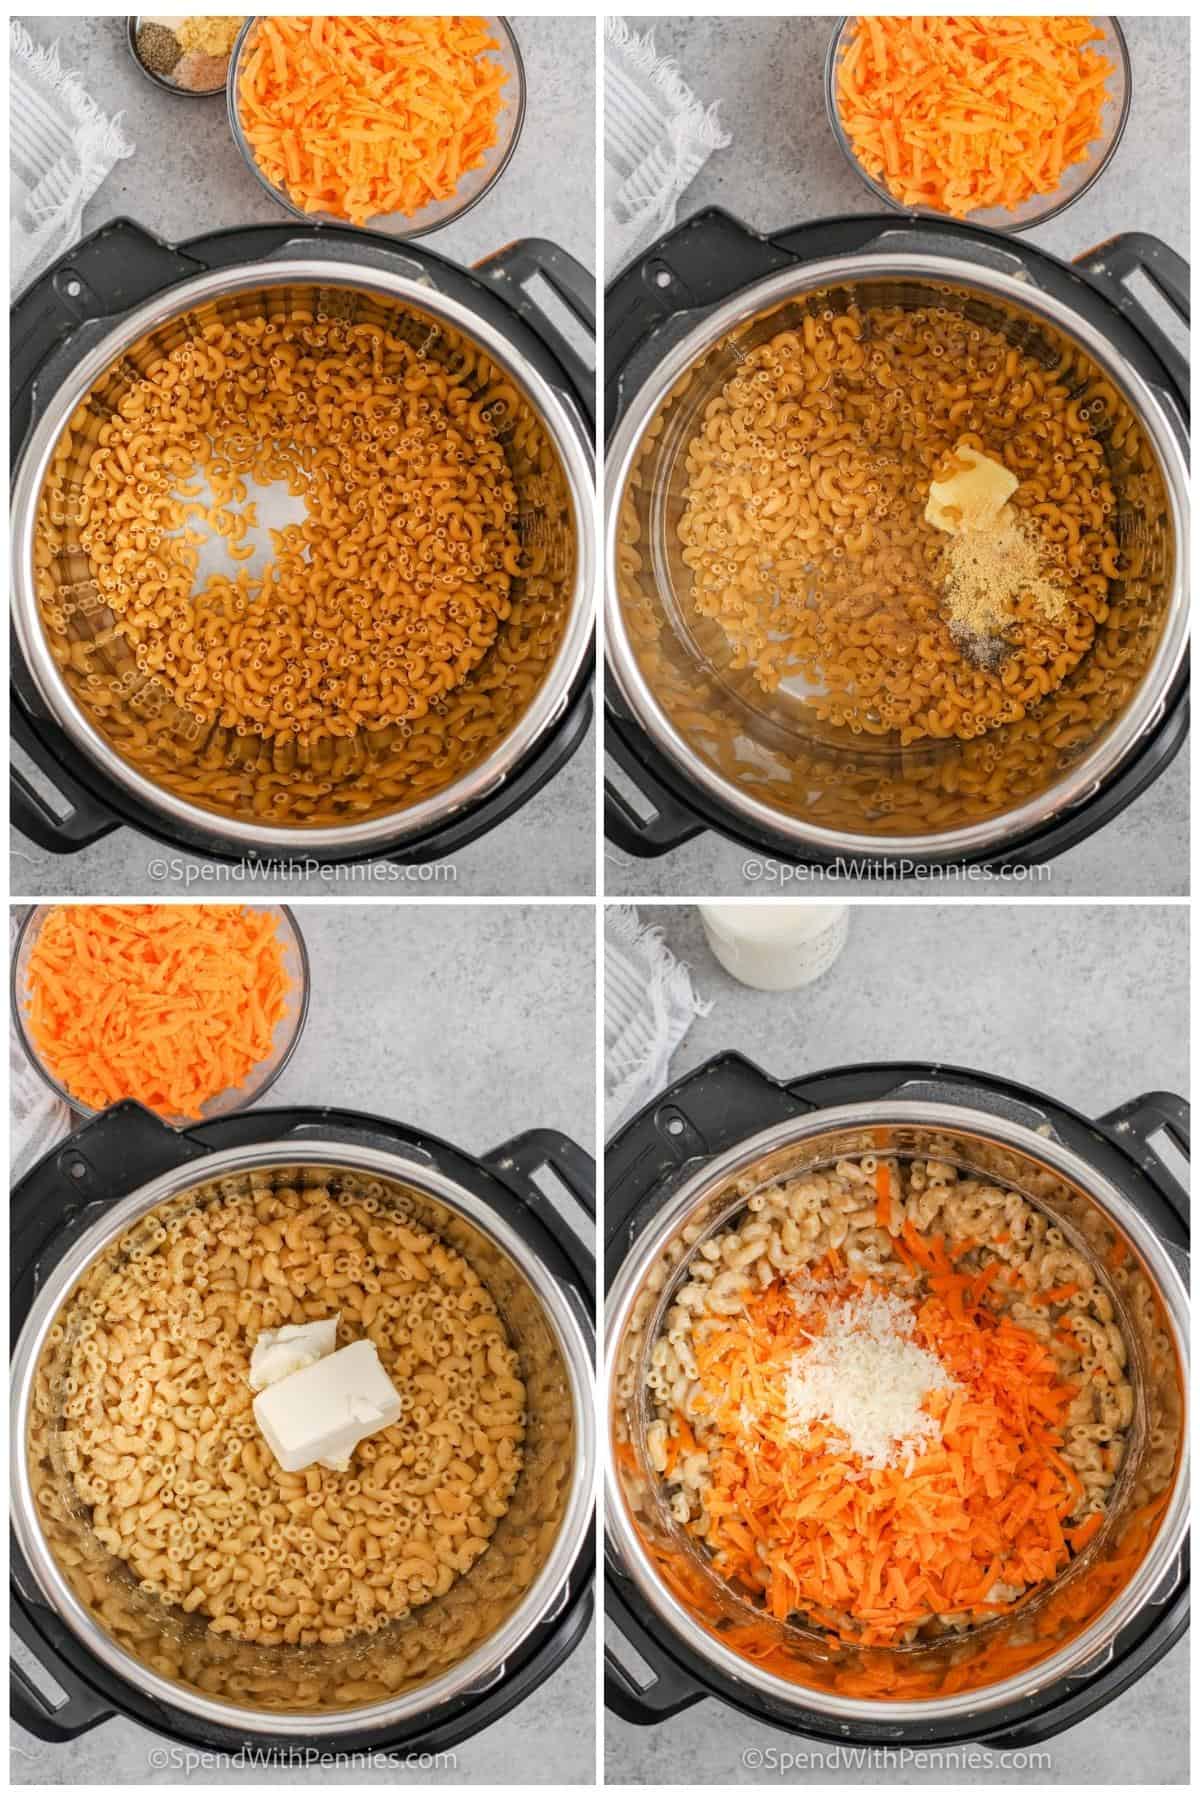 process of adding ingredients together to make Instant Pot Mac and Cheese